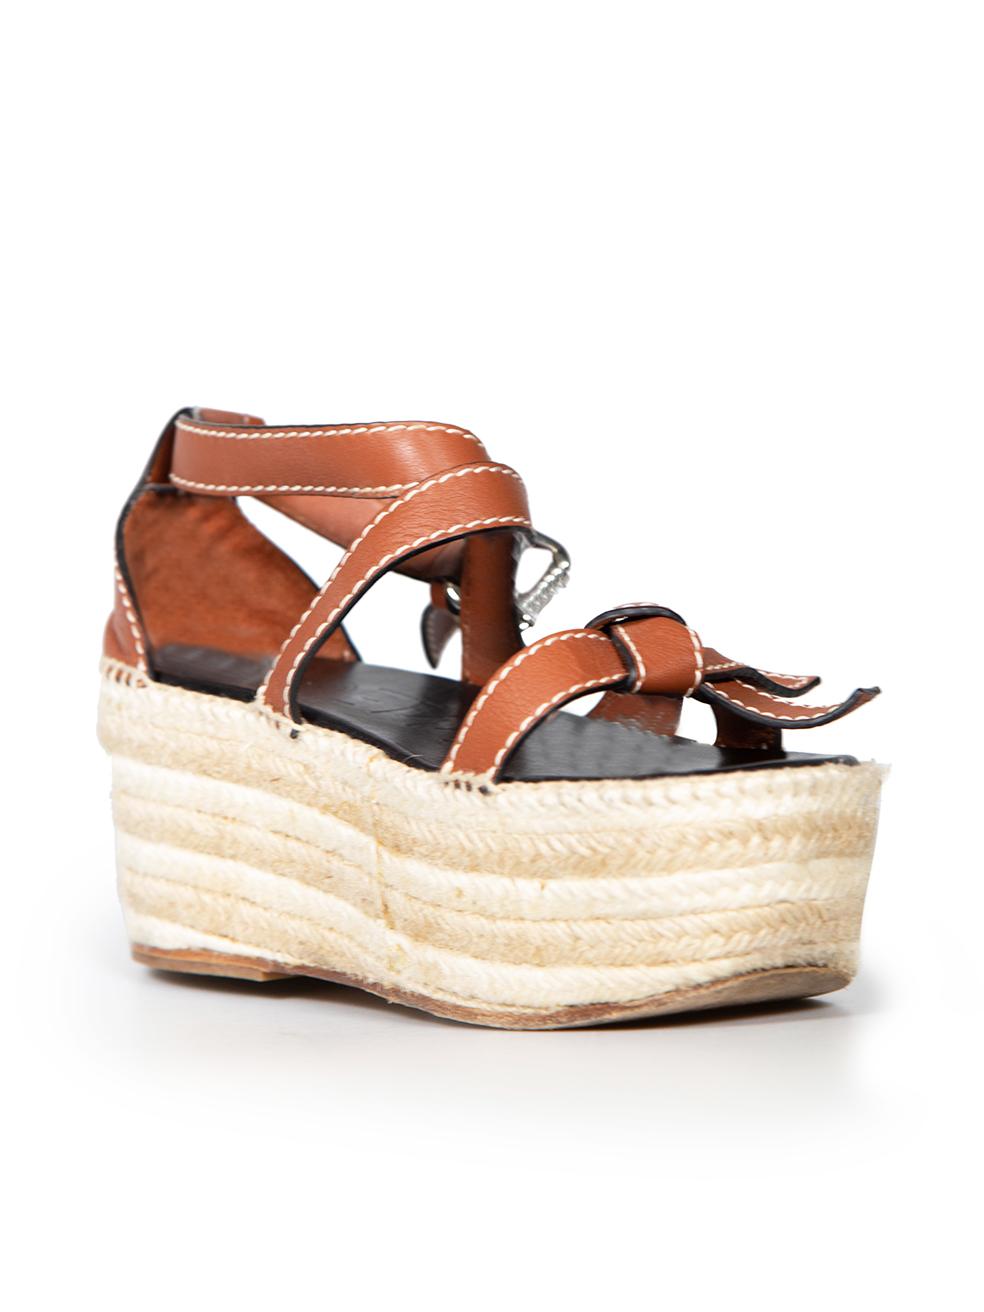 CONDITION is Very good. Minimal wear to shoes is evident. Minimal wear to the left shoe with glue marks to the raffia platform on this used Loewe designer resale item.
 
 Details
 Brown
 Leather
 Sandals
 Raffia platform
 Open toe
 Adjustable ankle